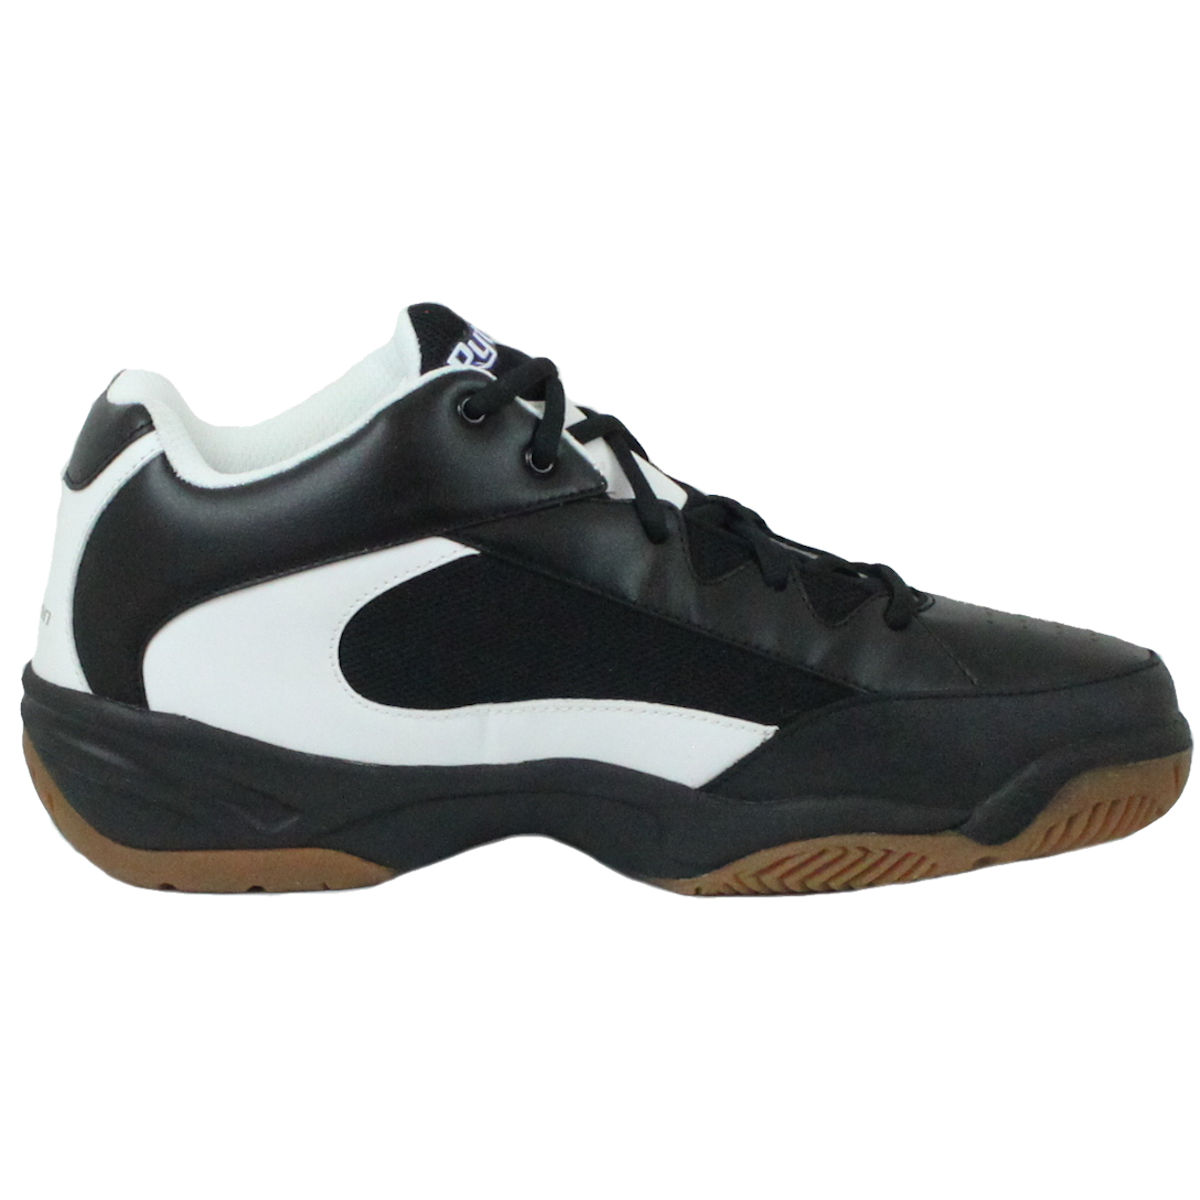 Python Wide (EE) Width Indoor Black Mid Size Racquetball (Squash, Badminton, Volleyball) Shoe - image 5 of 6